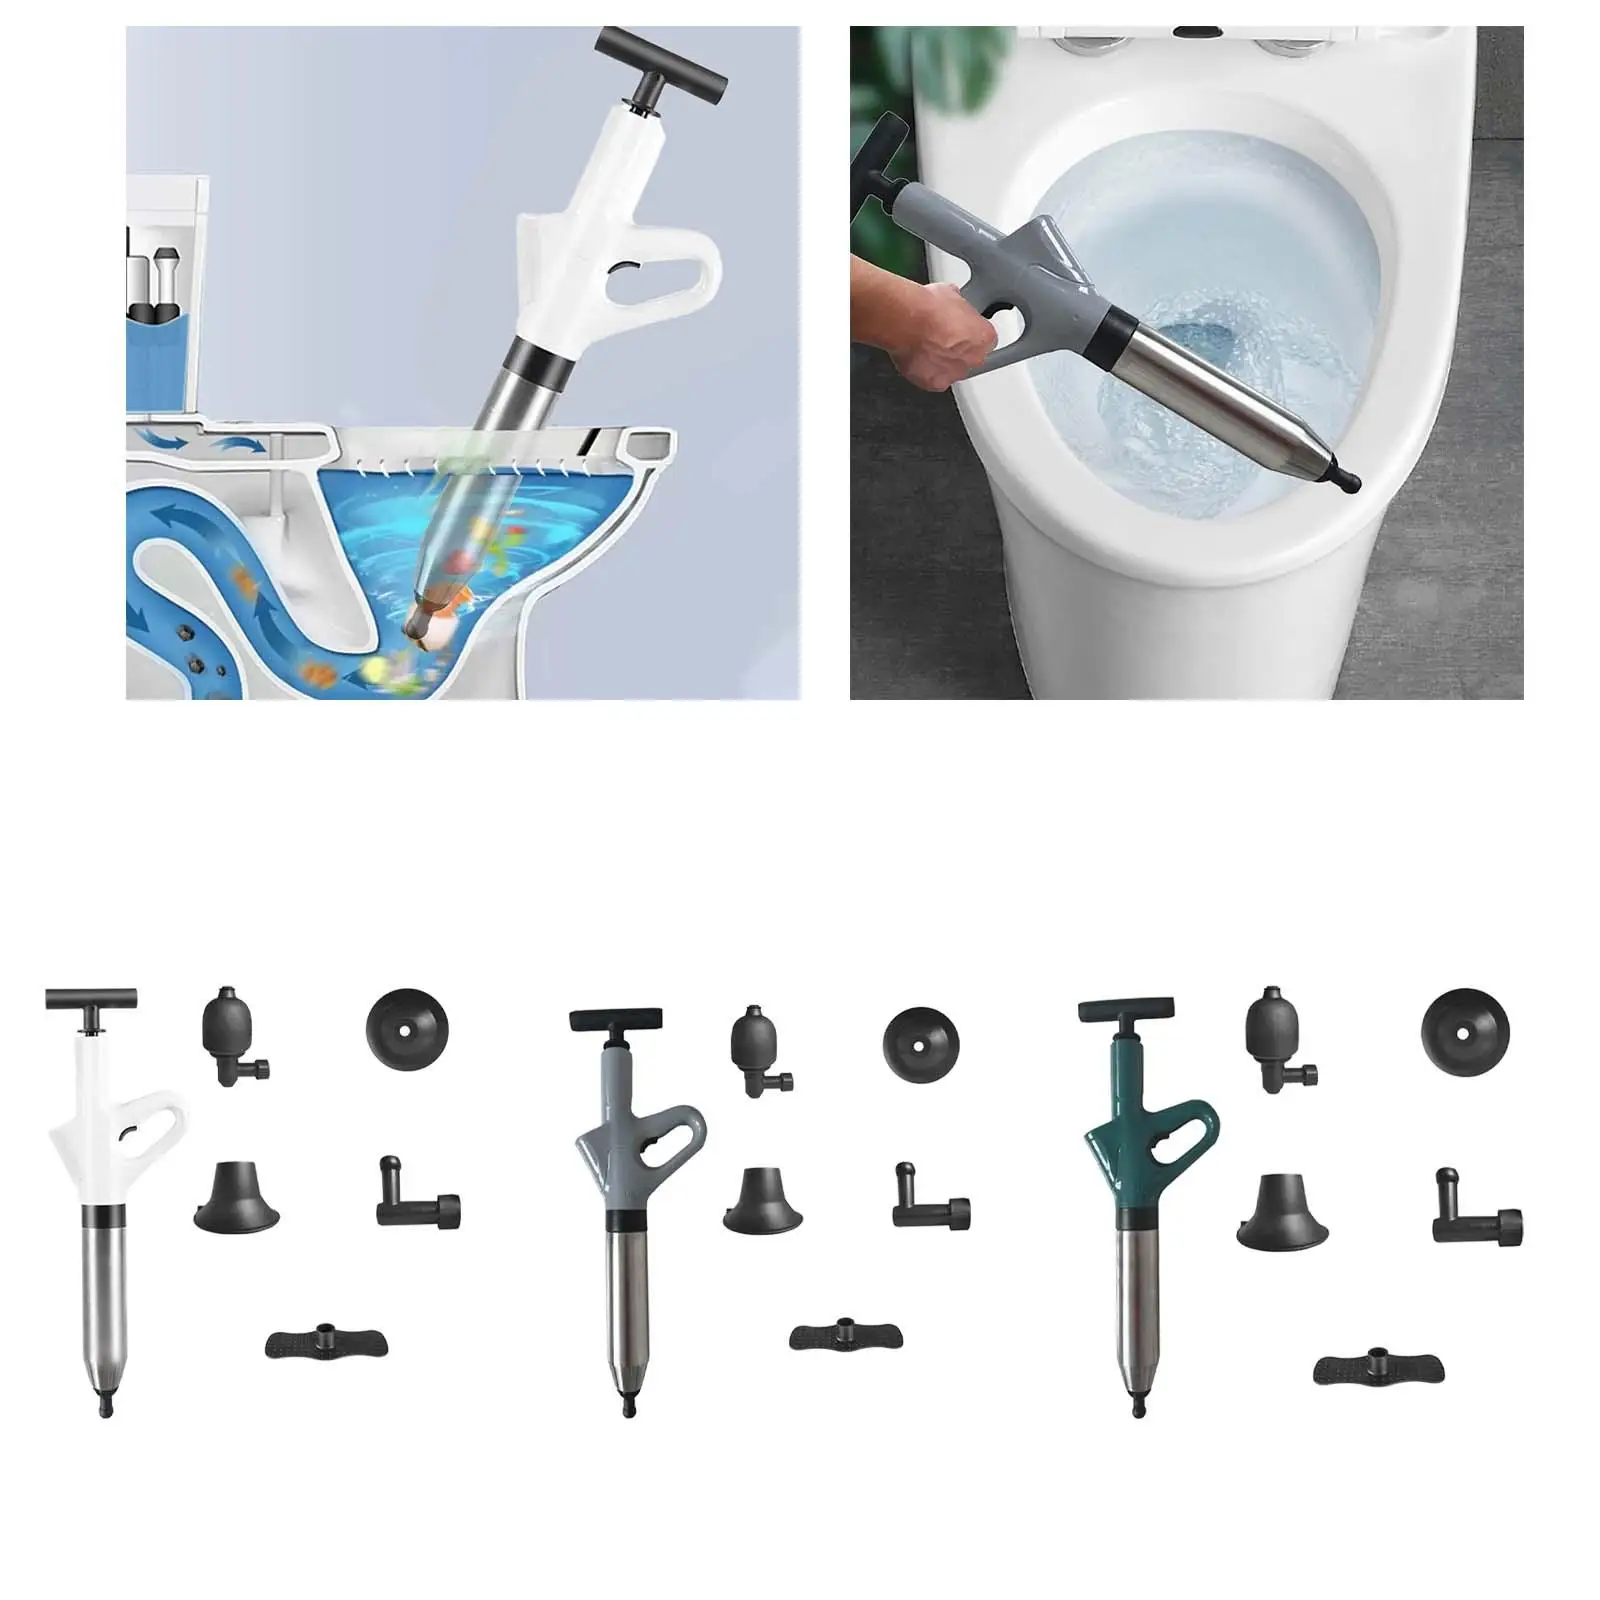 Toilet Air Plunger Sink Plungers for Clogged Toilet Toilet Drain Bathtub